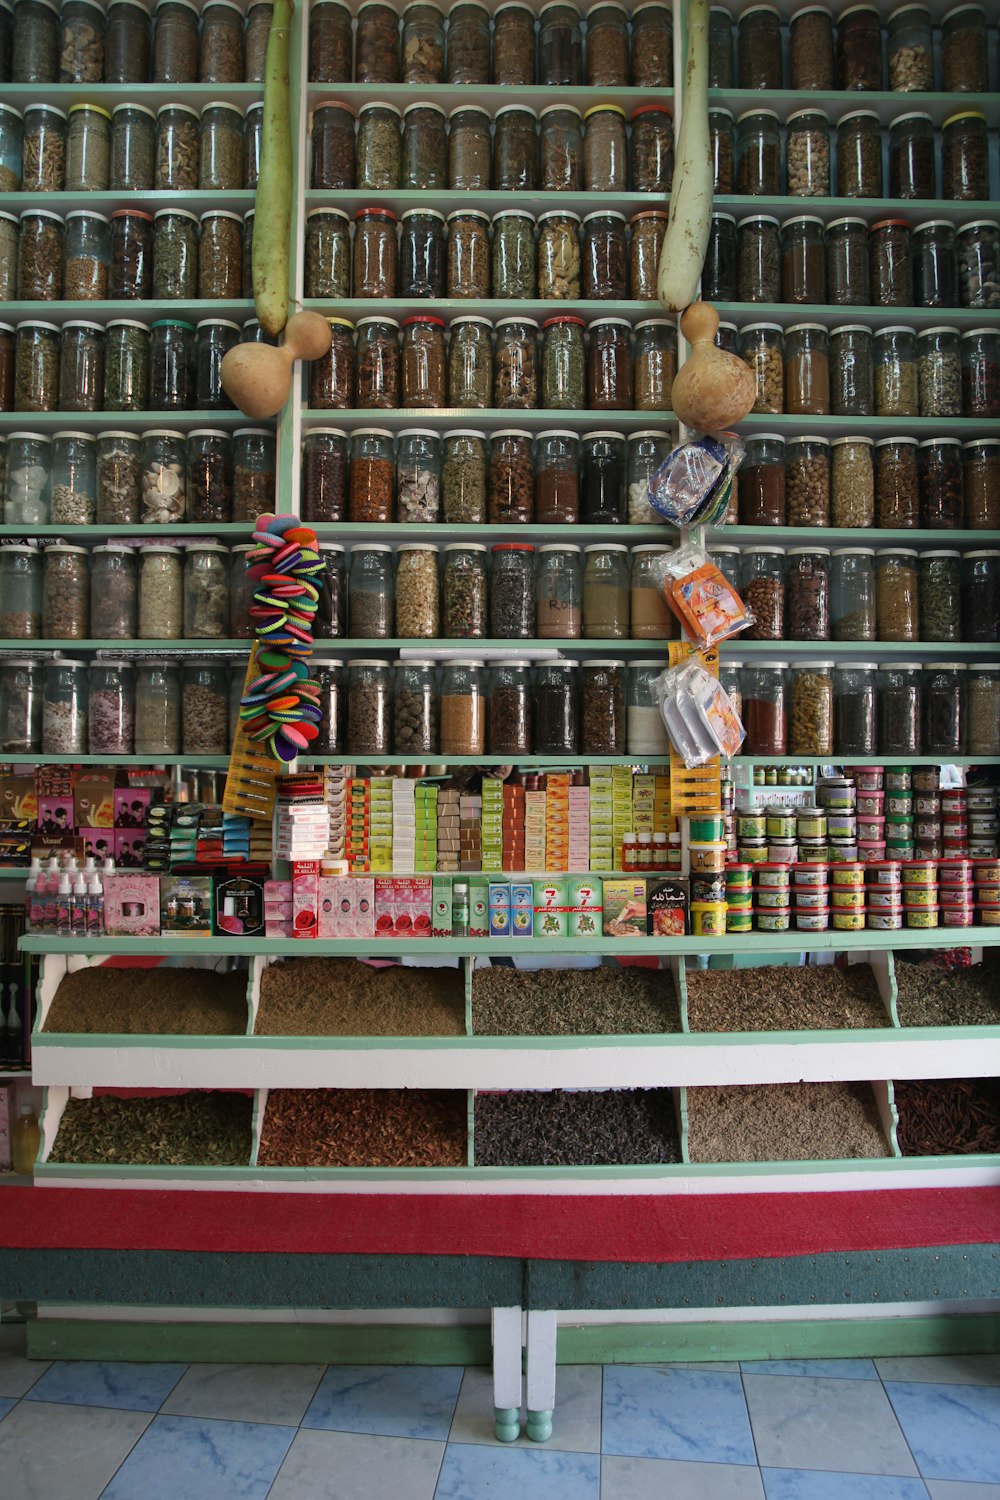 shelves of food on a store